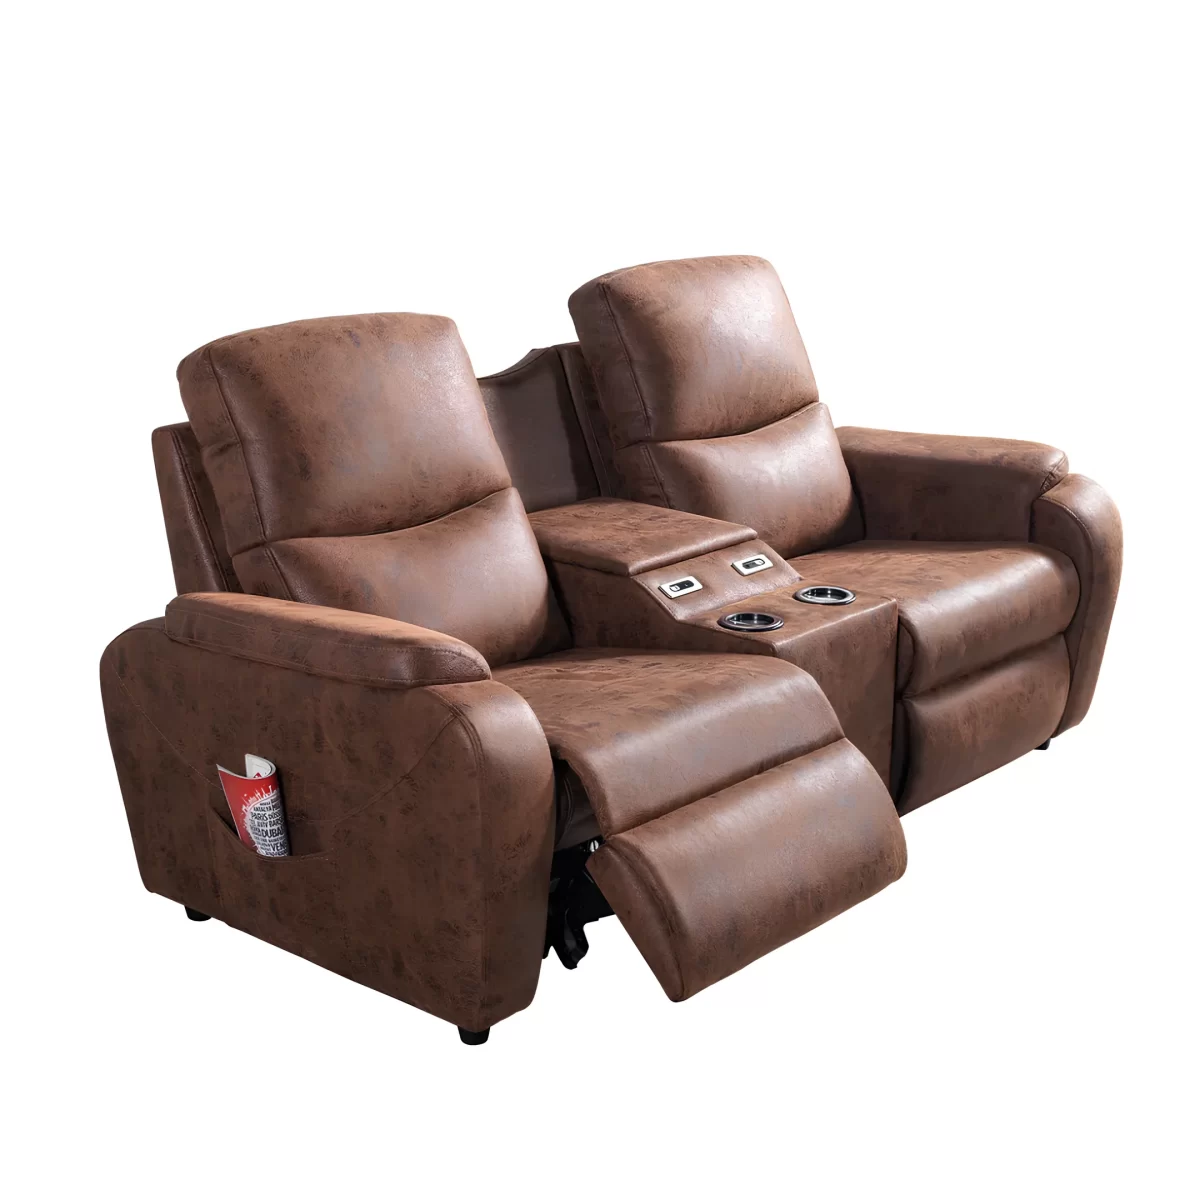 alis double reclining sofa electric recliner usb port cupholder 5